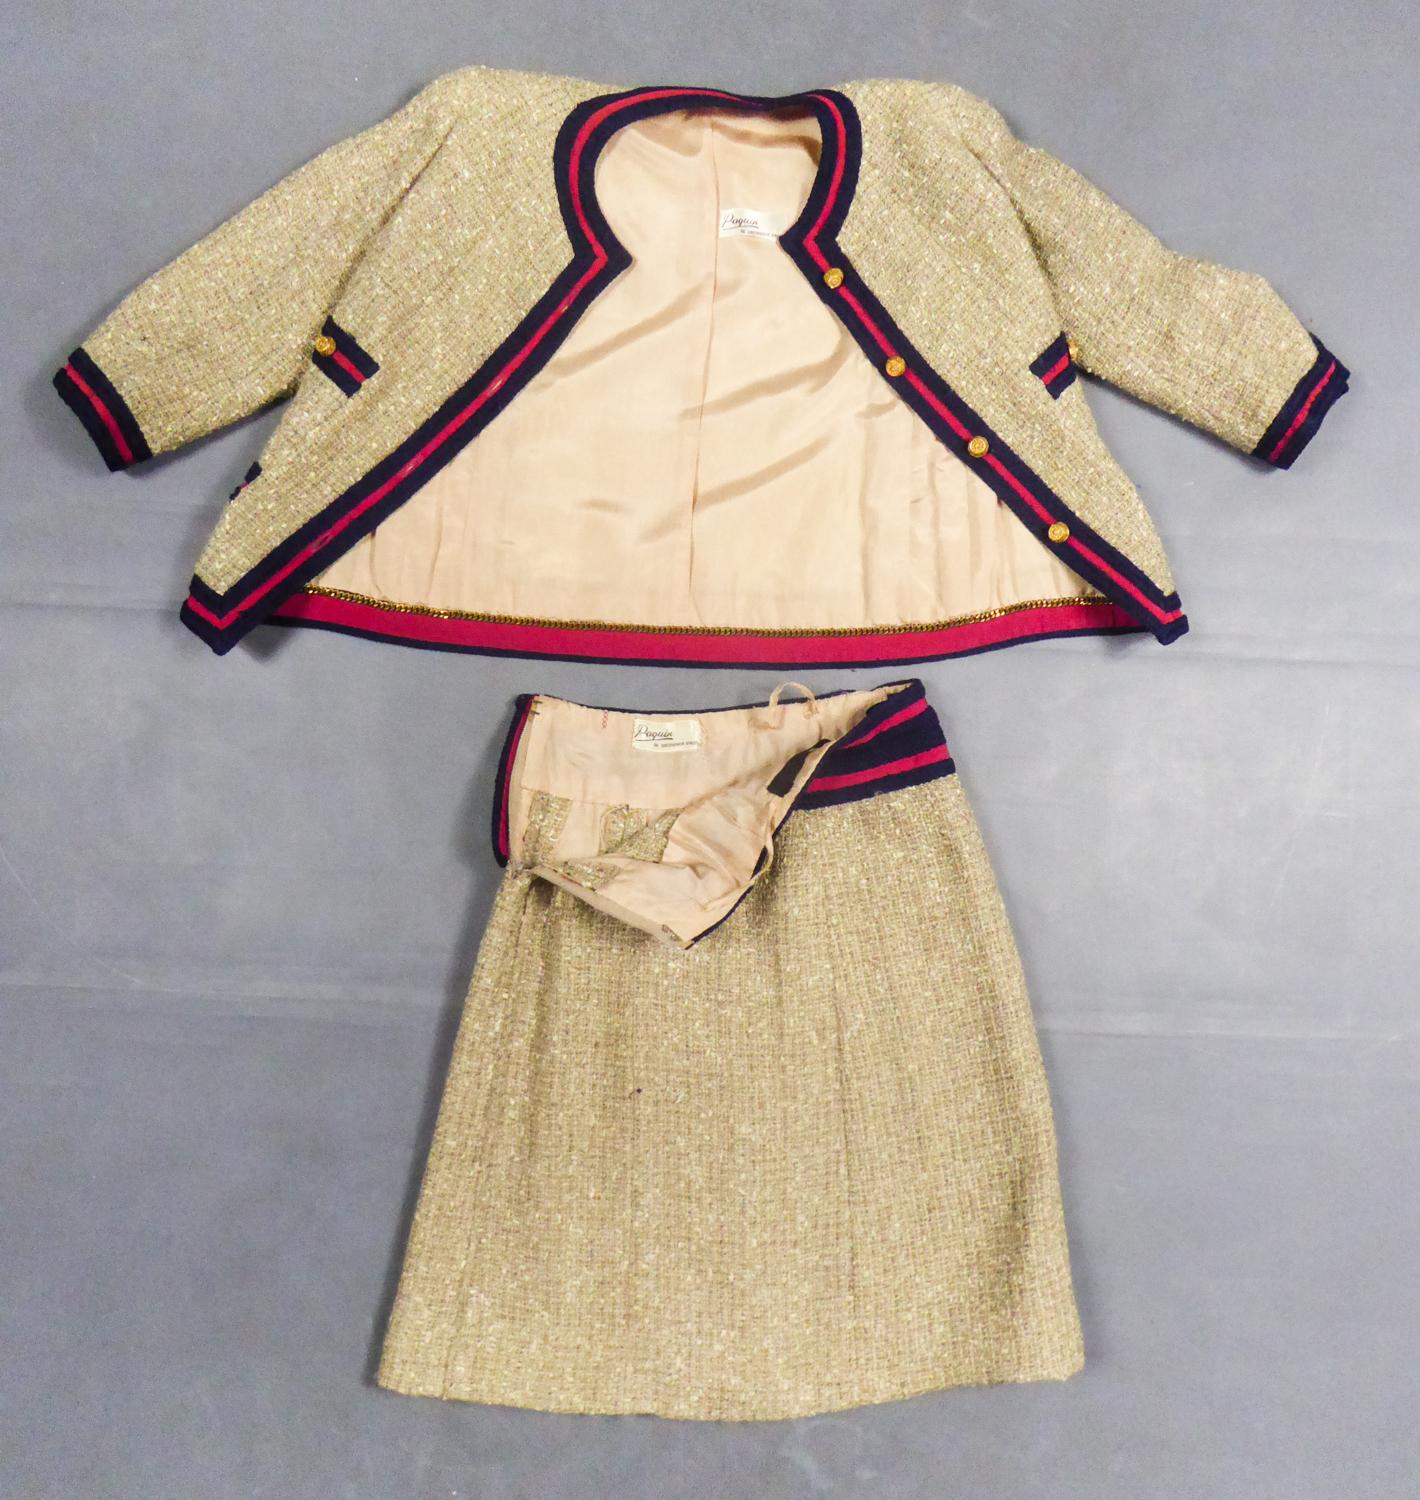 Spring Summer 1961

France

Haute Couture skirt suit by Chanel, 1961 Collection (attributed to). Skirt and jacket in black and cream checked twine wool tweed, outlined with fuchsia grosgrain and navy wool braids. Hollow openwork gilt metal buttons